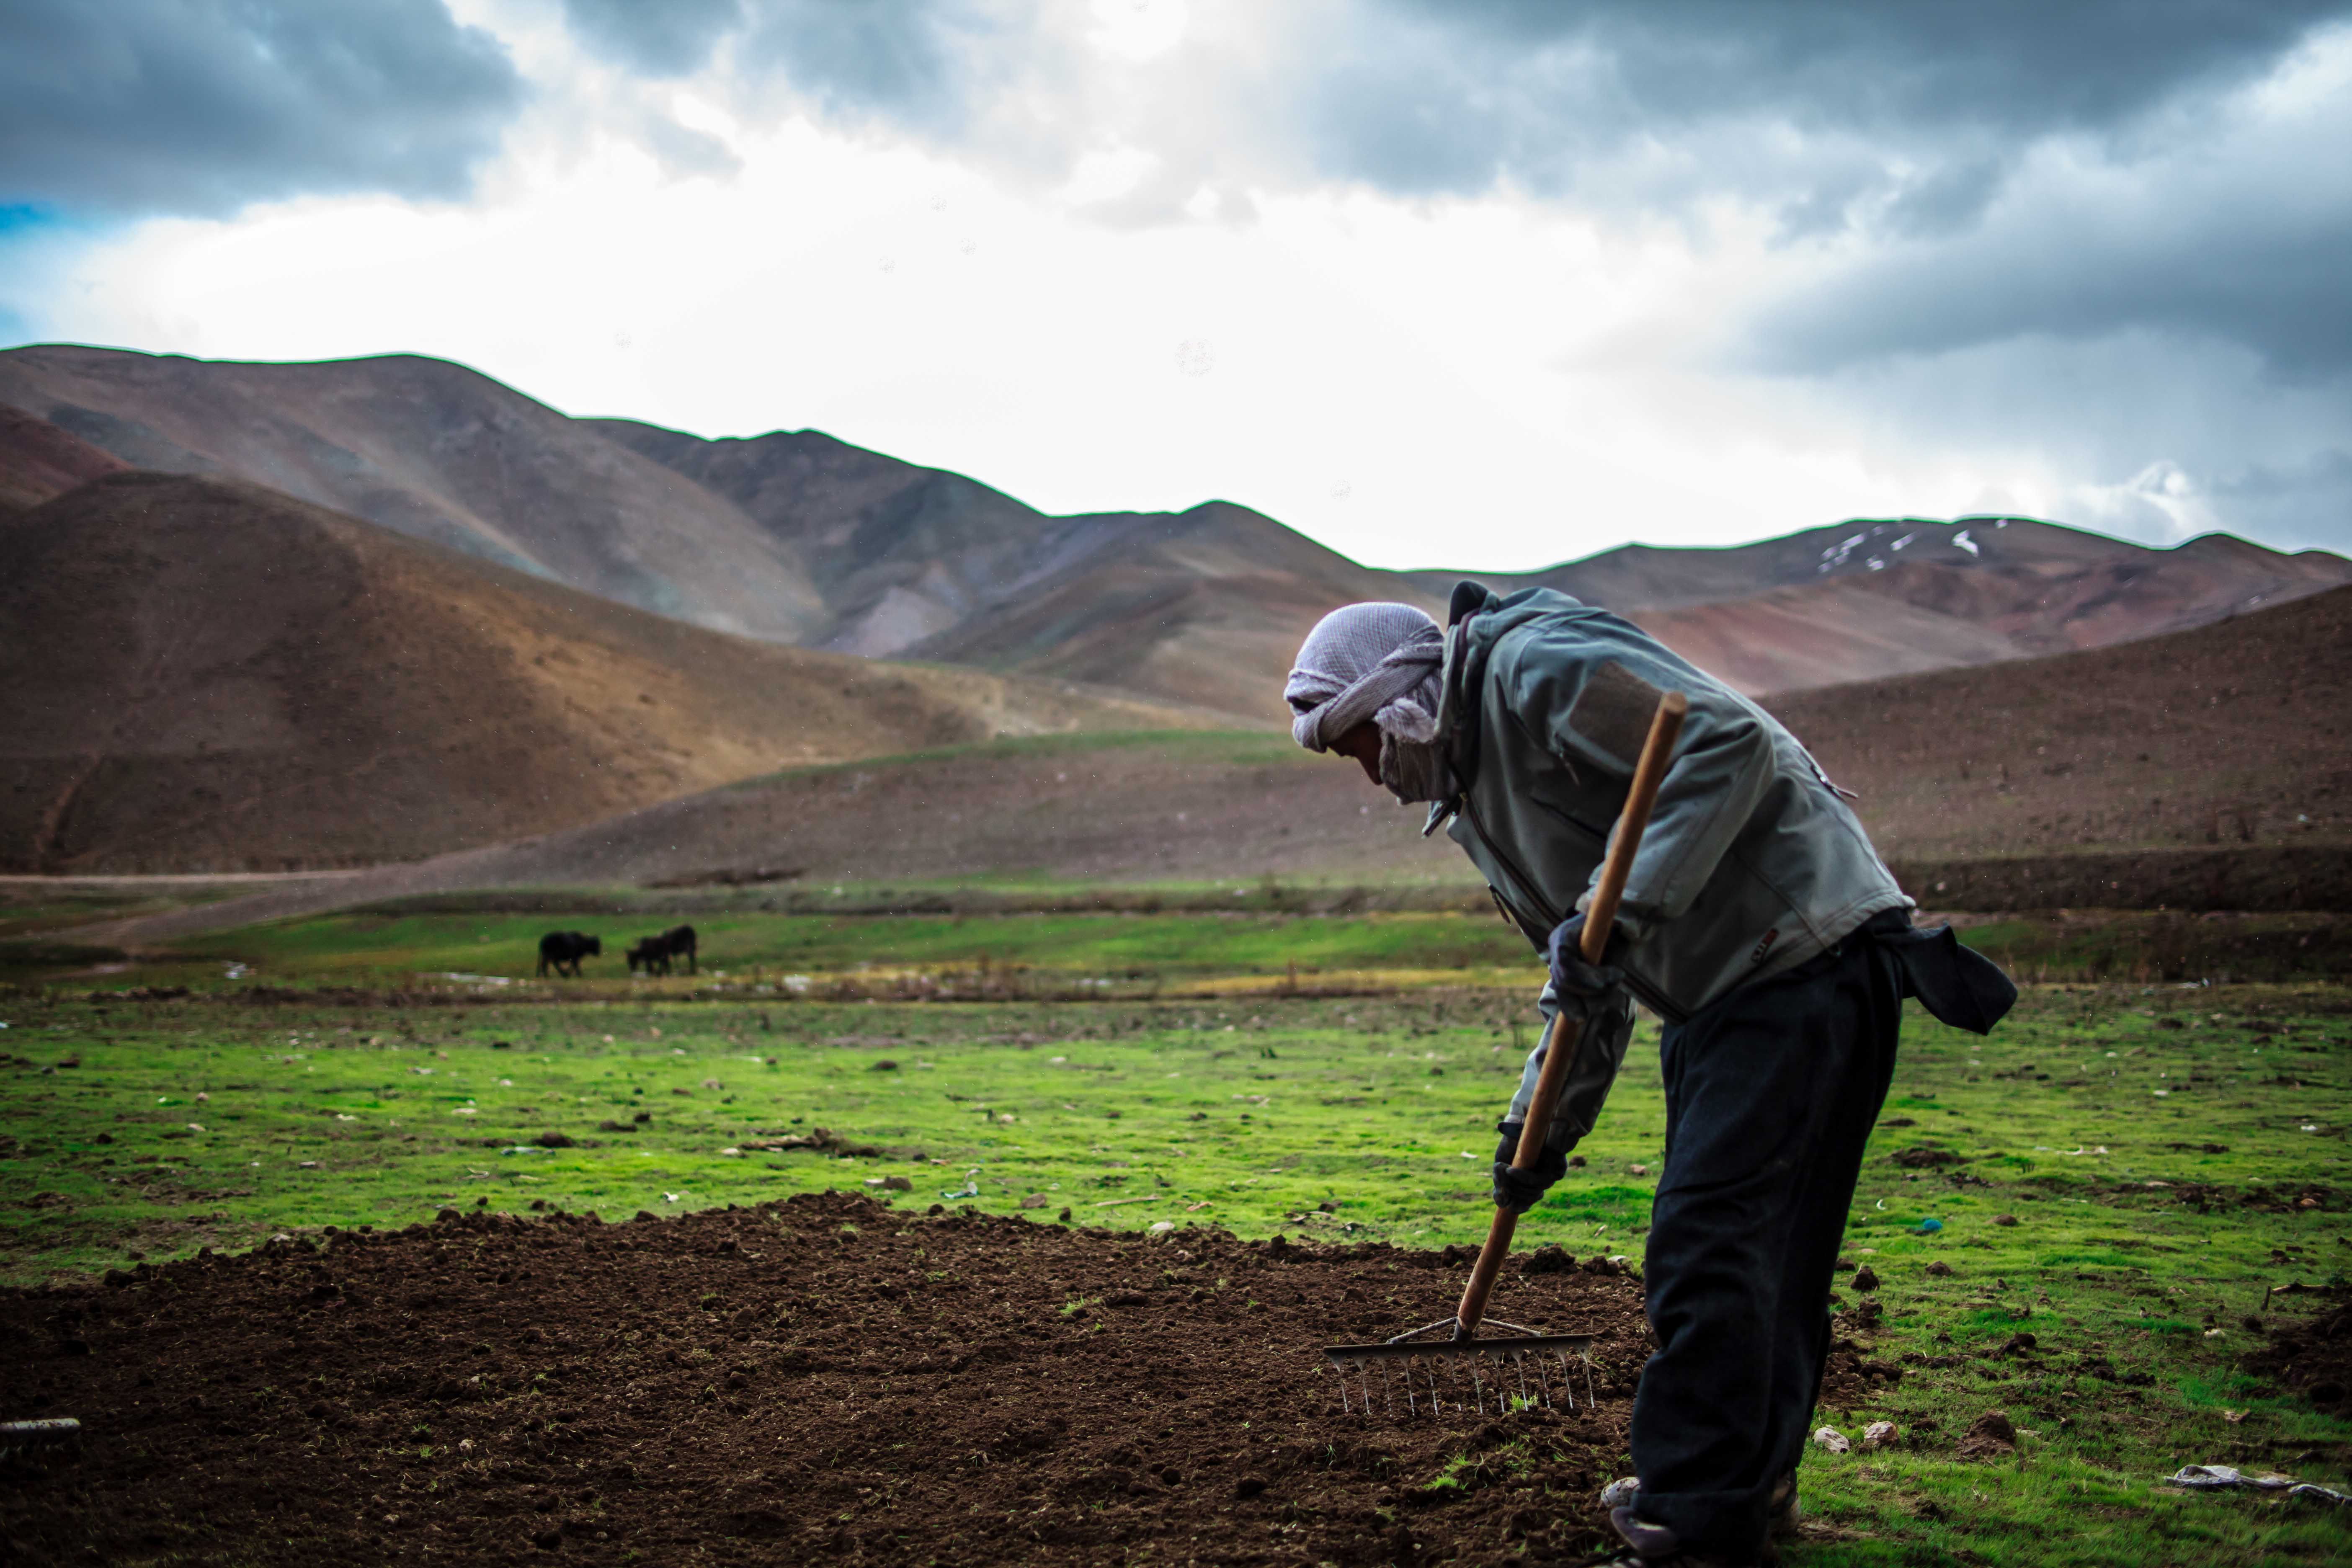 A man farming in the mountains of Afghanistan